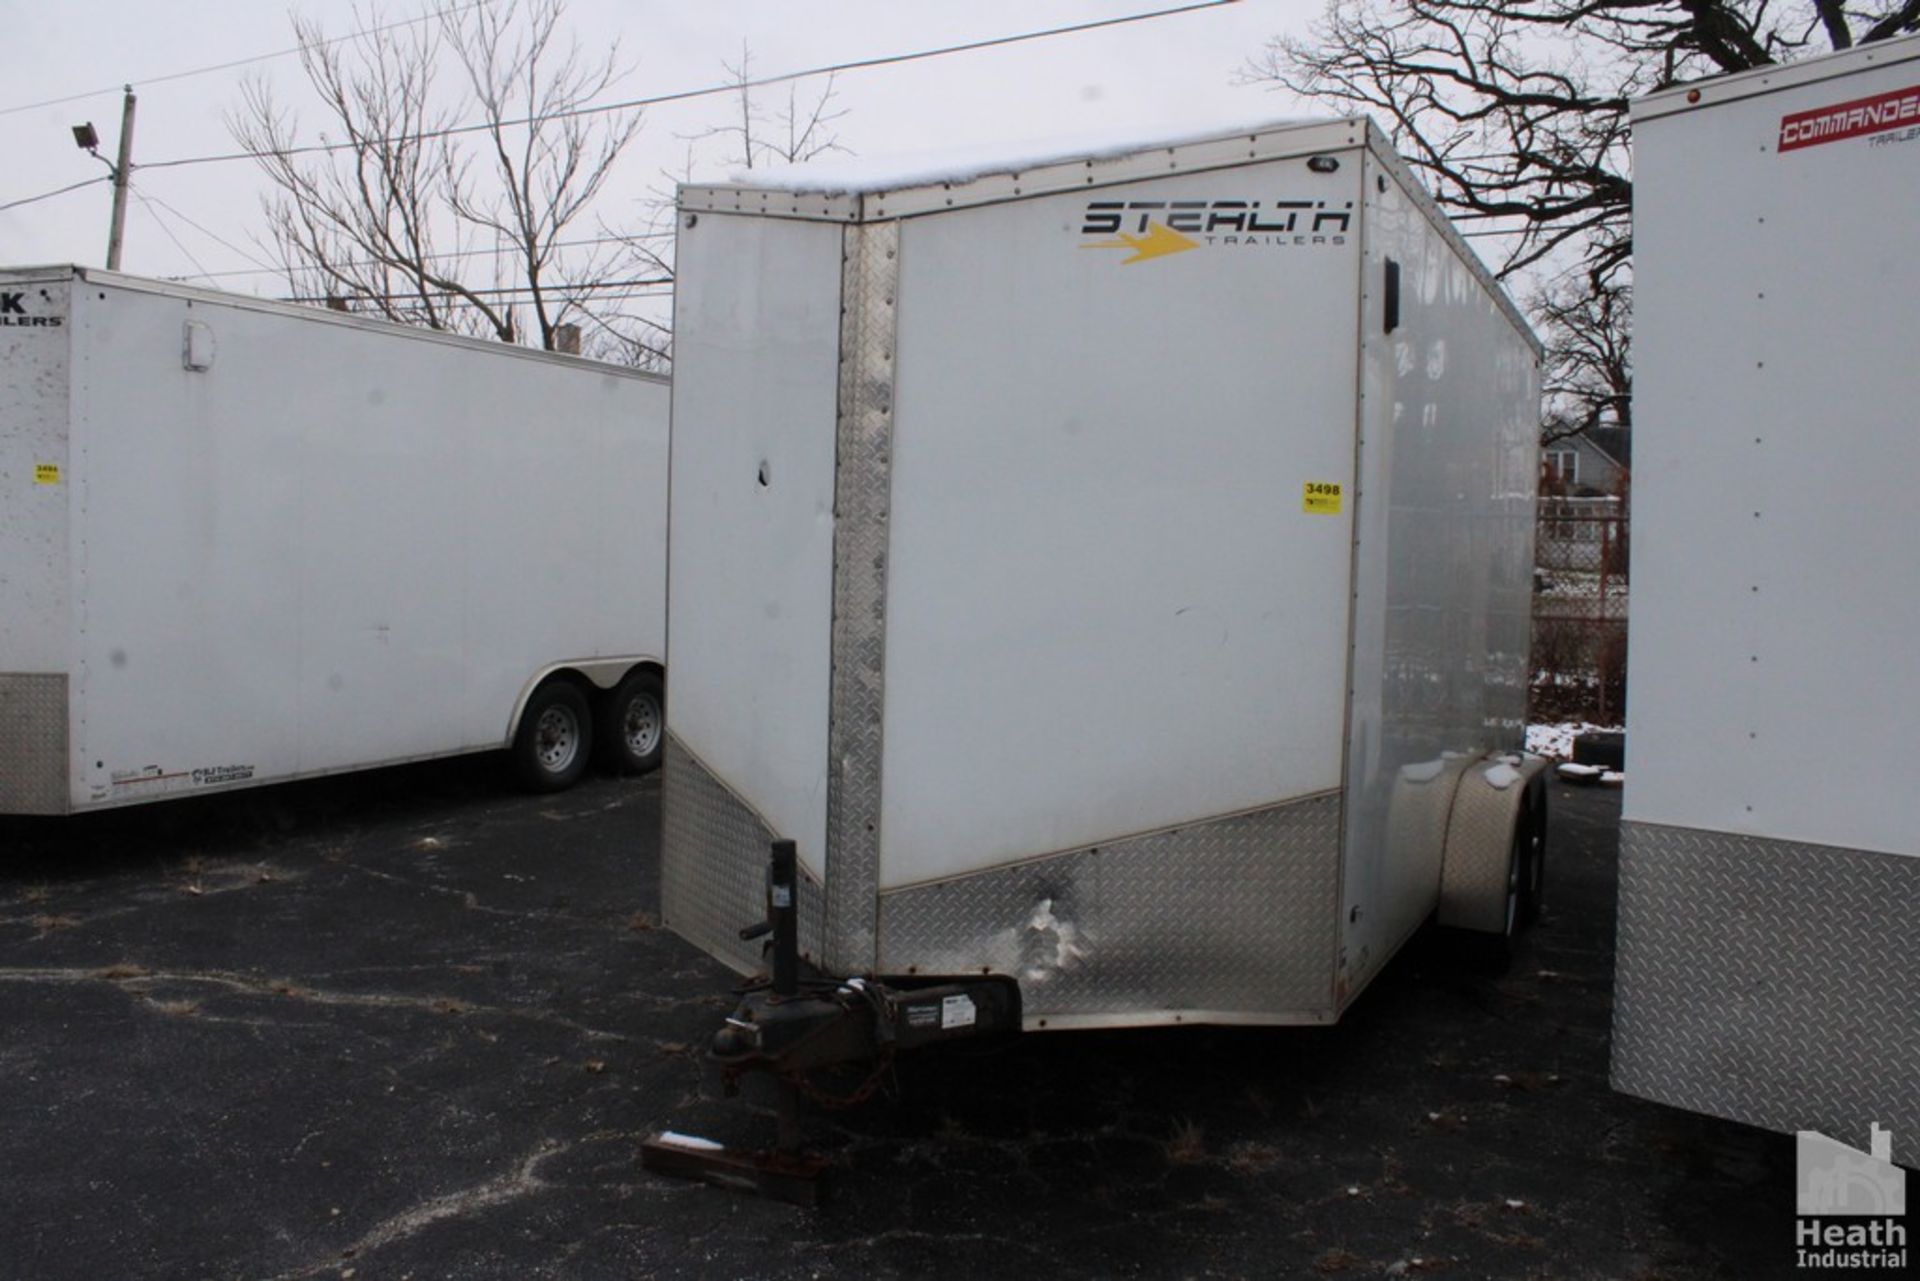 STEALTH 14’ ENCLOSED TRAILER, VIN: 52LBE1420LE078405 (NEW 2020), WITH SIDE DOOR, DROP DOWN BACK